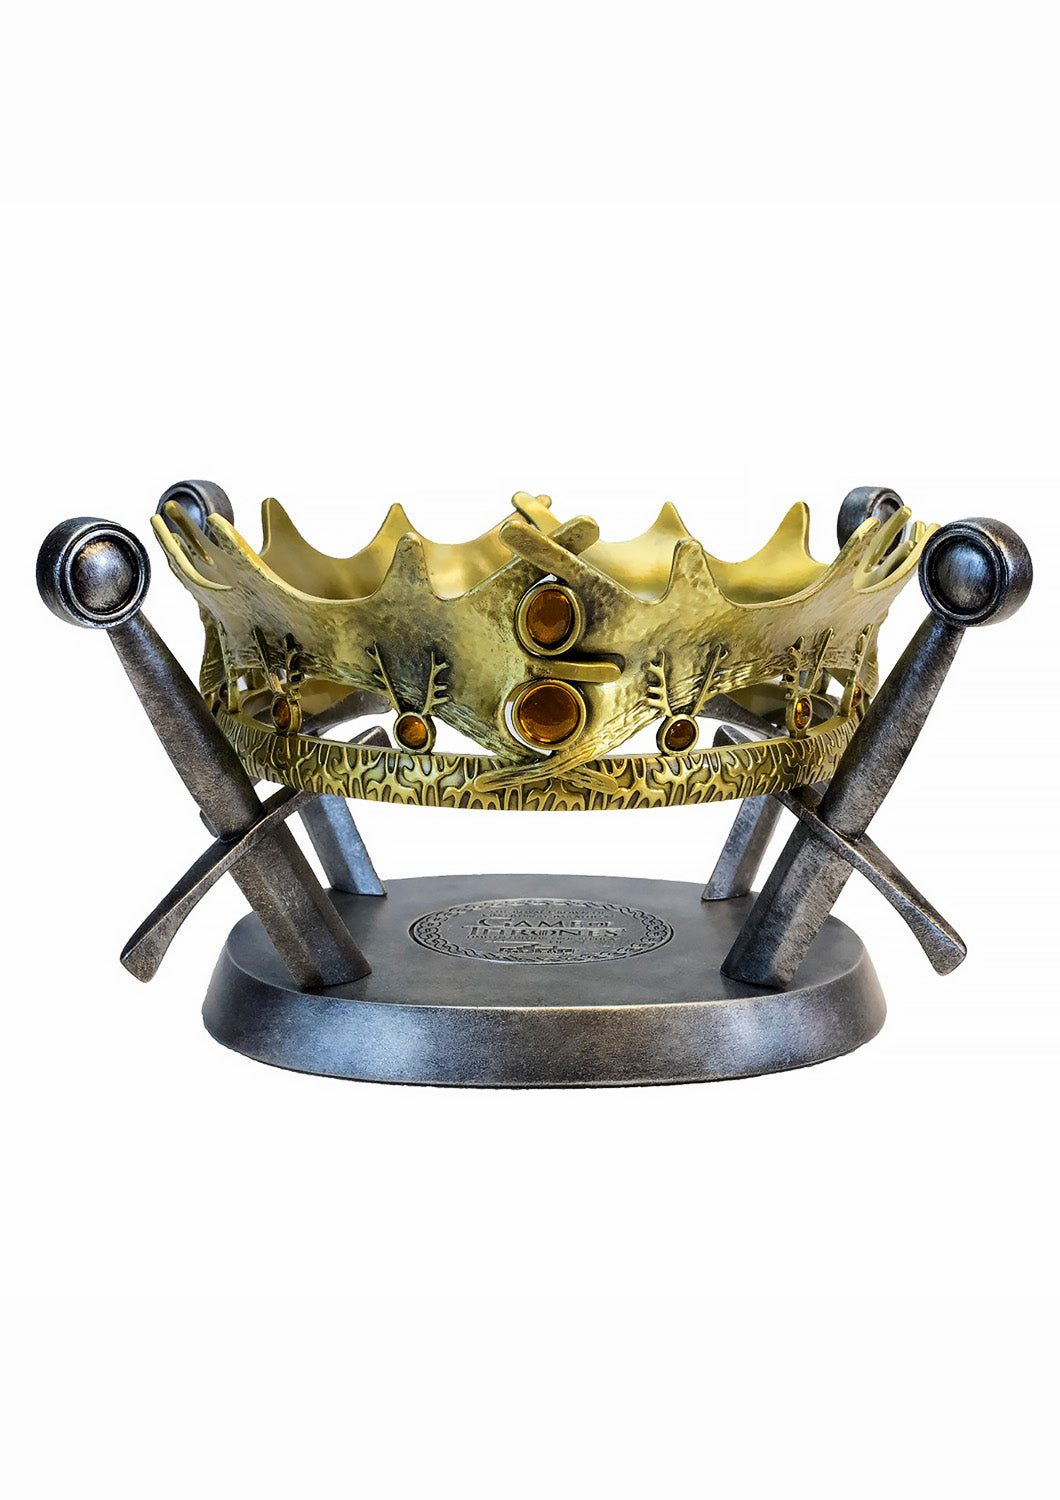 FACTORY ENTERTAINMENT GAME OF THRONES ROBERT'S CROWN REPLICA LIMITED EDITION - 408453 - Anotoys Collectibles